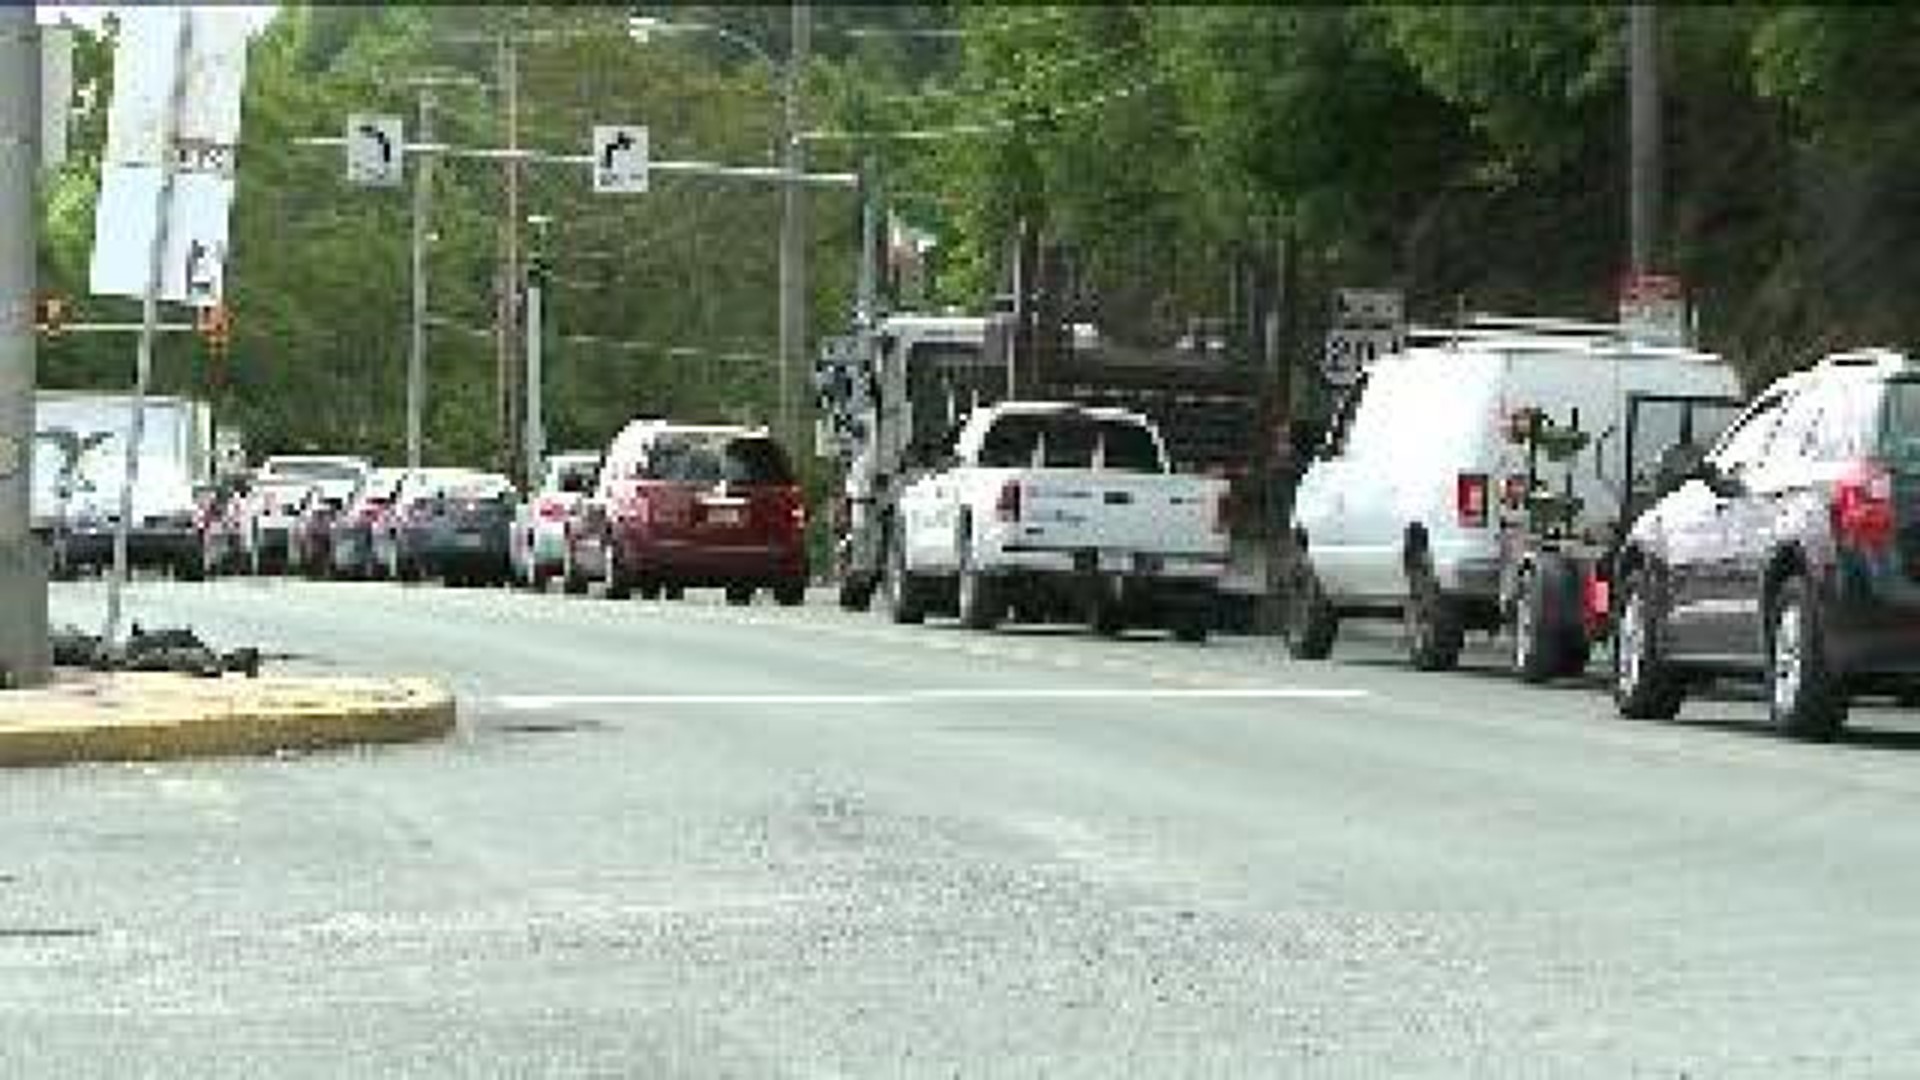 PennDOT Makes Changes to Improve Traffic Flow